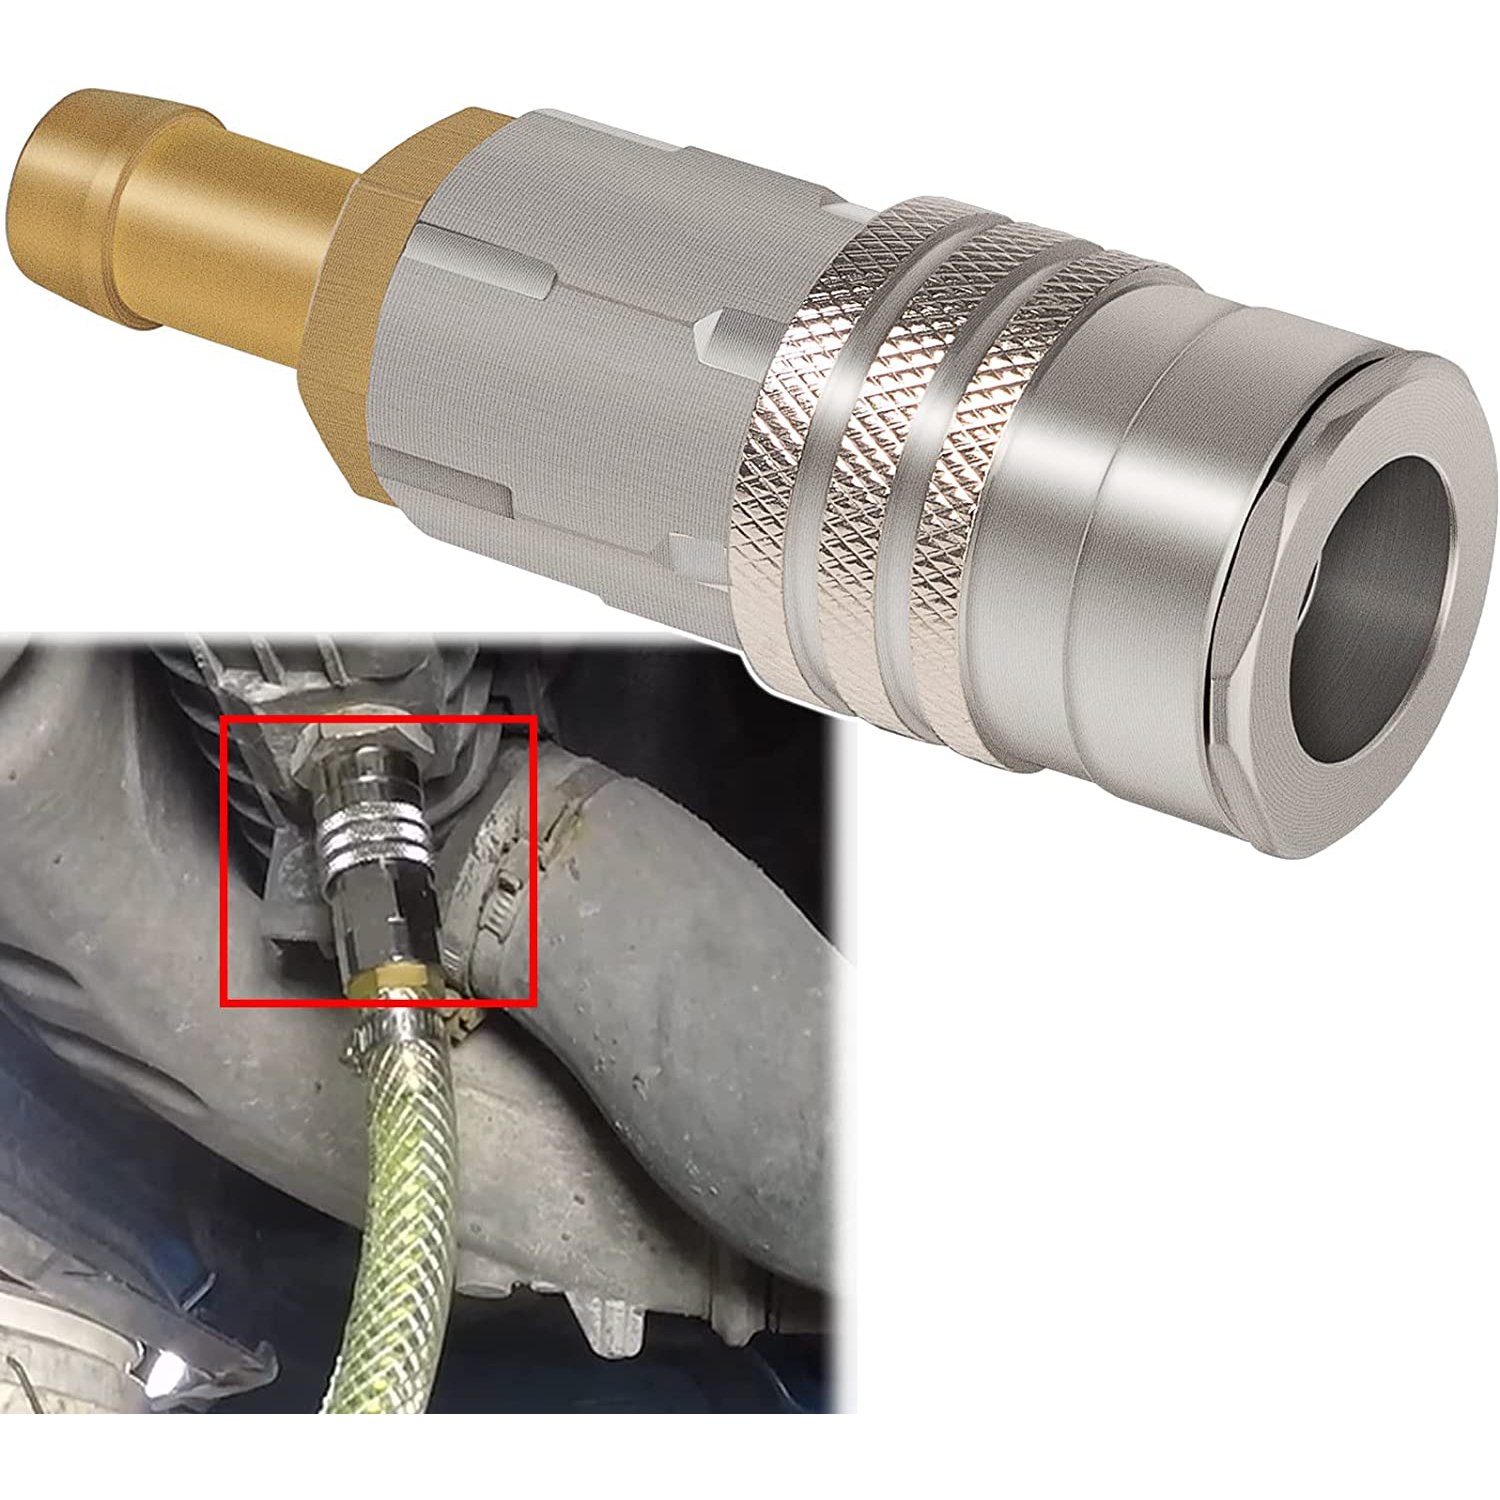 Coupler/Fittings/ Adapter for Radiator Coolant Drain Hose 9996049 Compatible with Volvo & Mack Trucks and Bus,